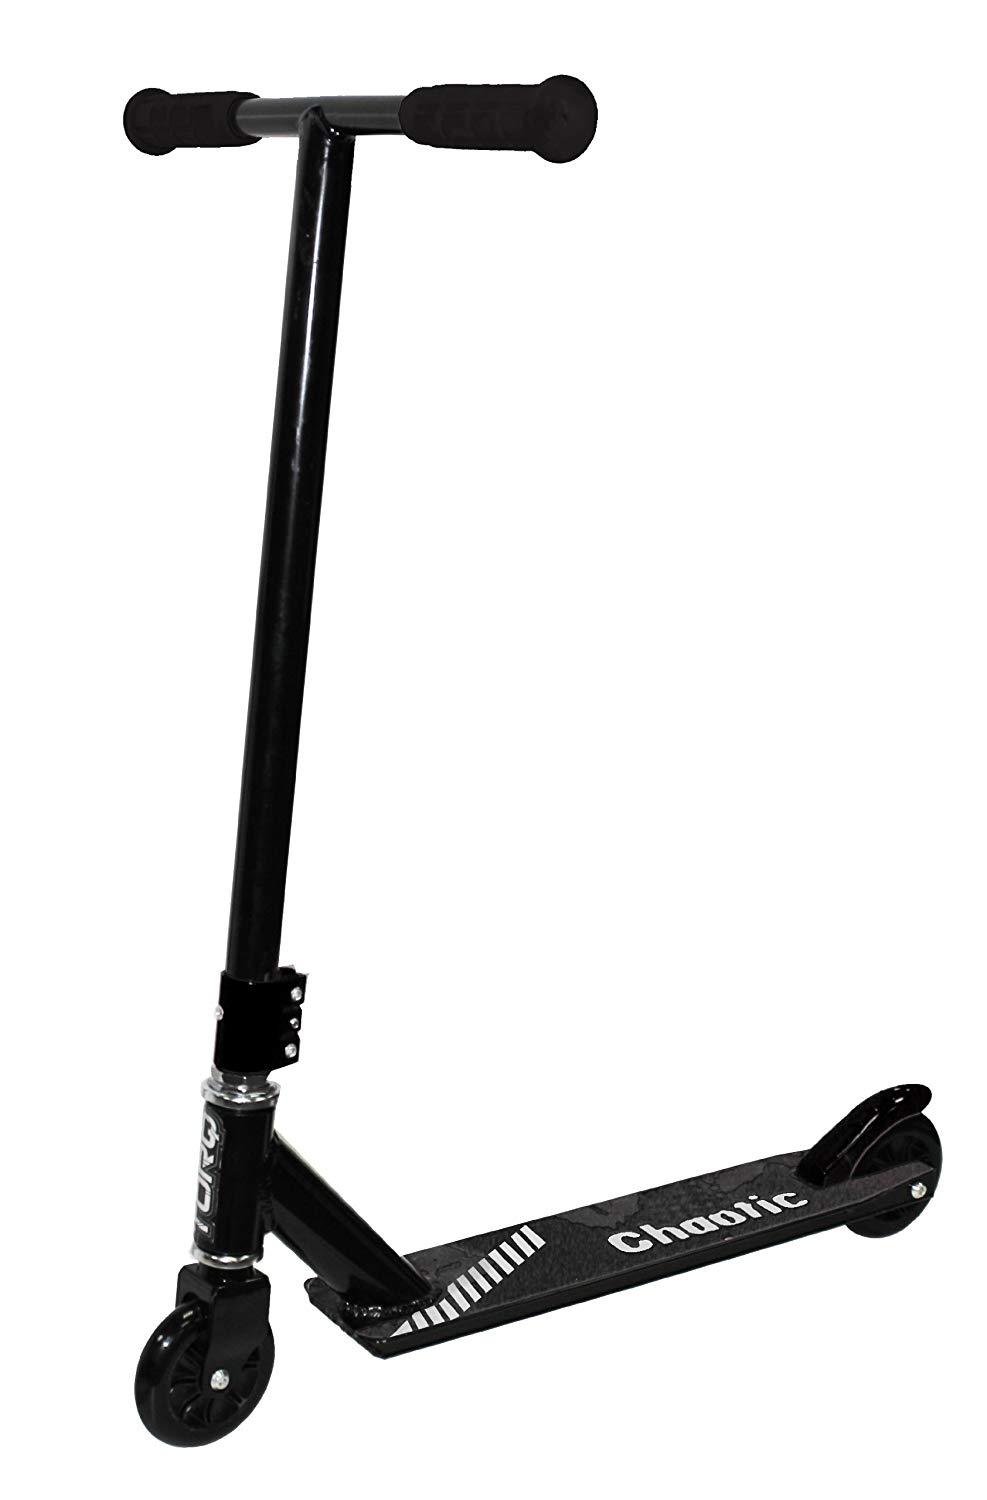 Ozbozz| Torq Chaotic Scooter - Black | Earthlets.com |  | play scooters